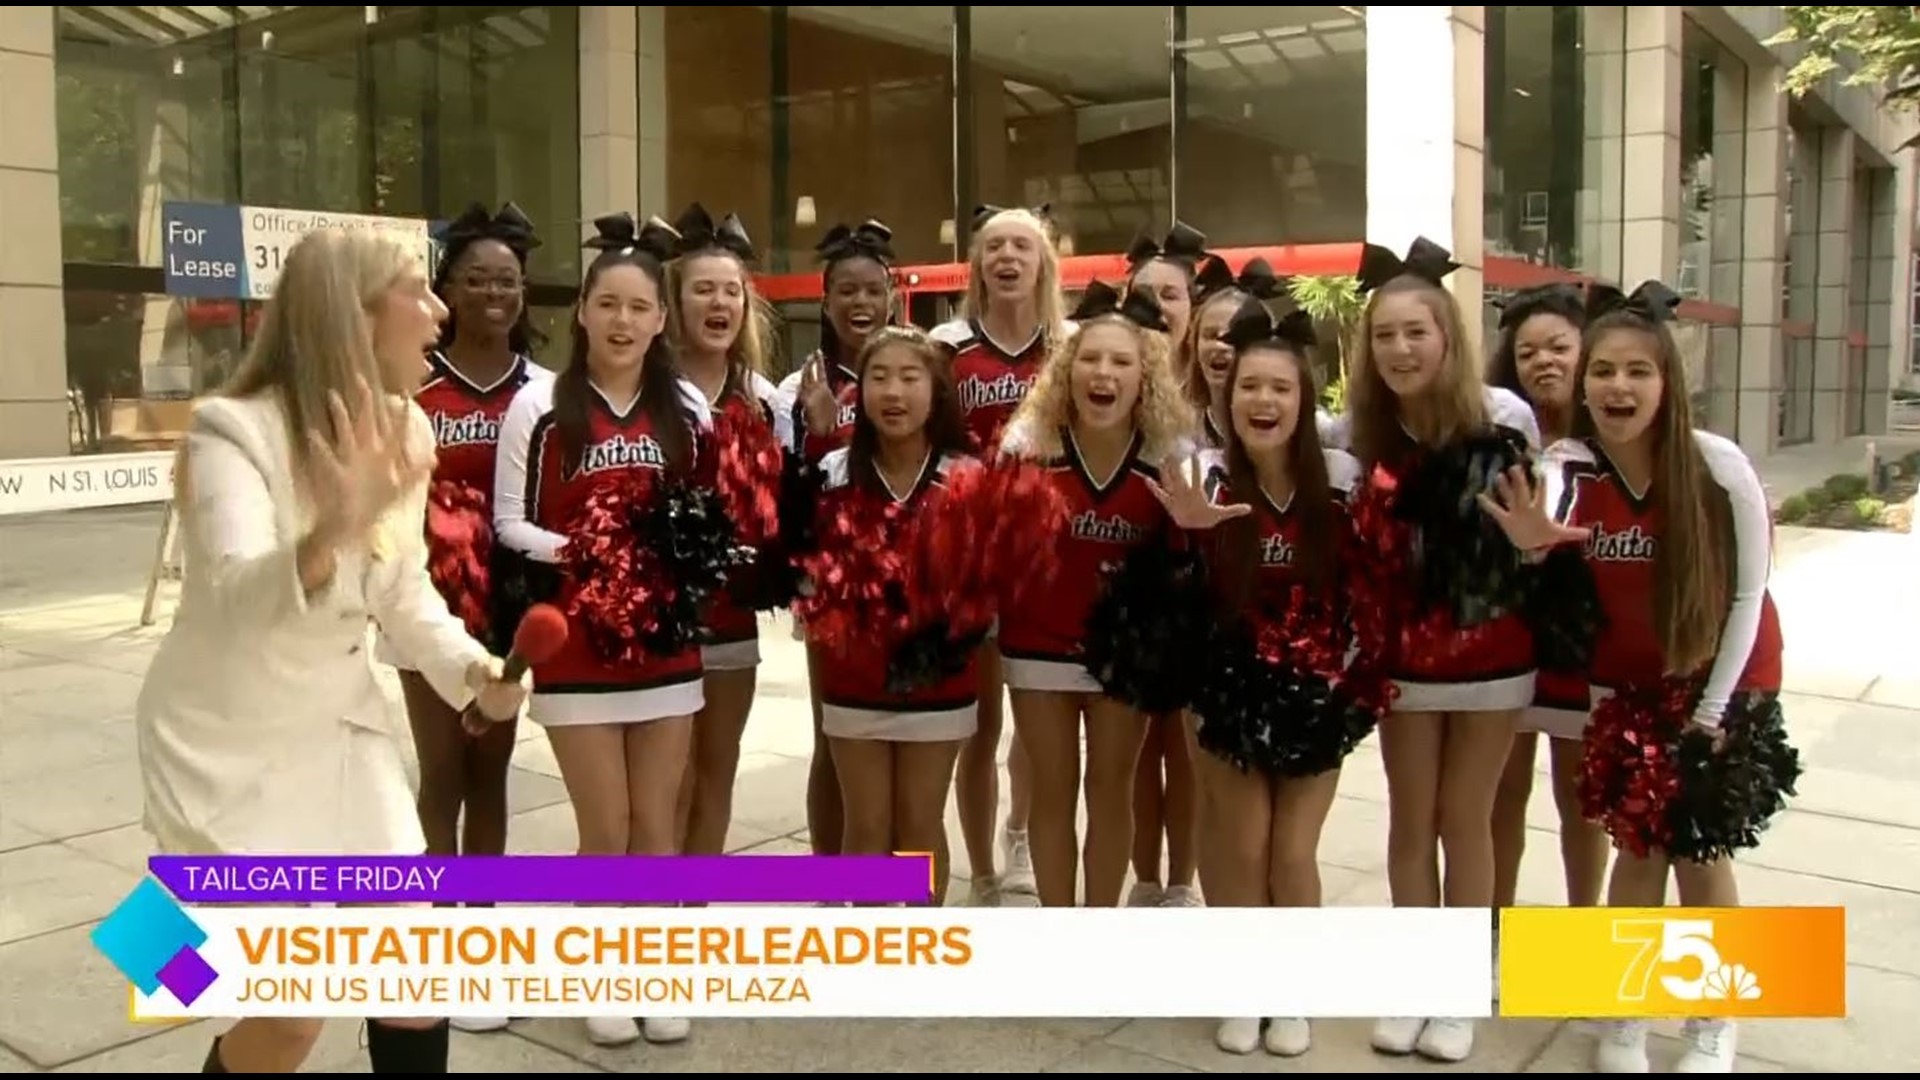 The Visitation Academy cheerleaders join Mary in Television Plaza to pump us up for the first Tailgate Friday